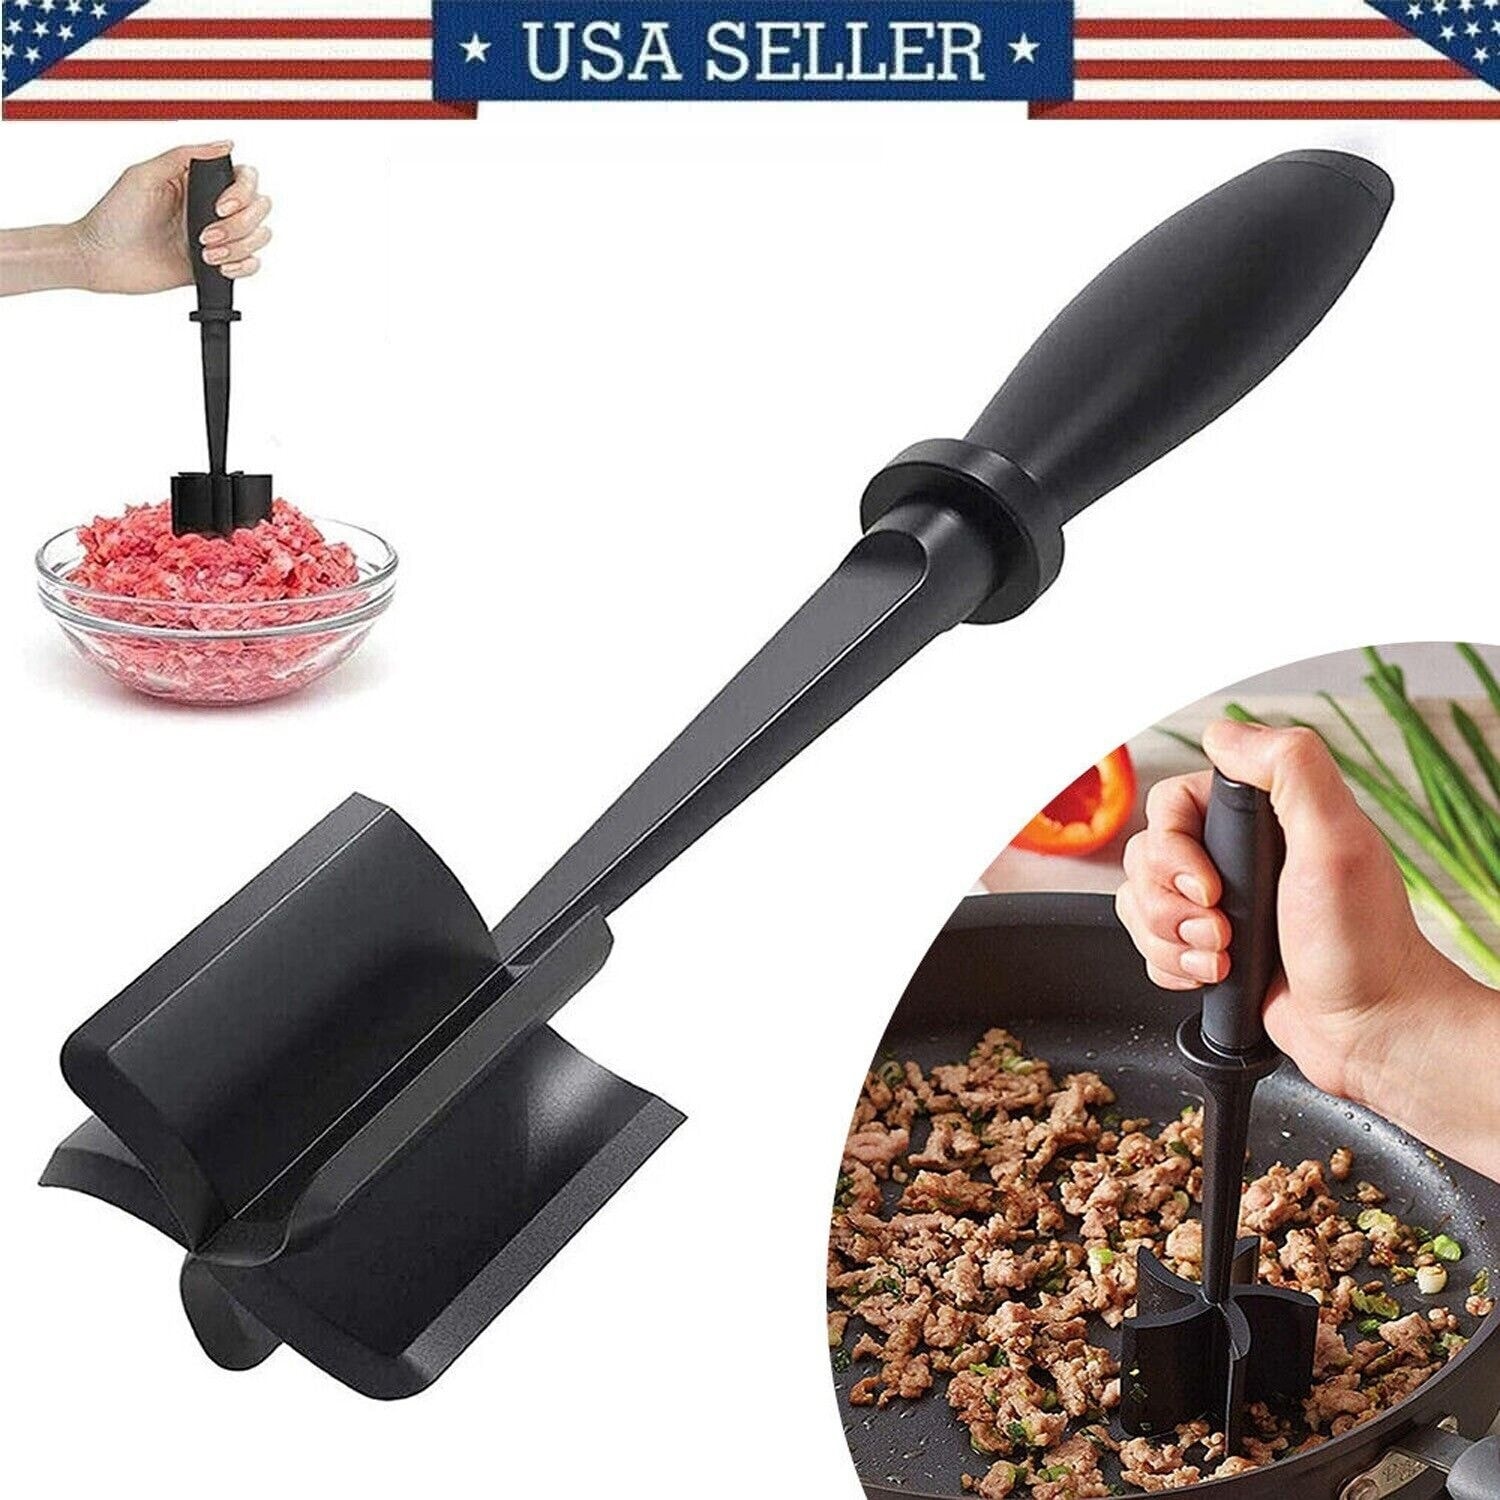 https://ak1.ostkcdn.com/images/products/is/images/direct/0055ff6725cd206afee20f0dcd362877a55b717d/Heat-Resistant-Meat-Hamburger-Chopper-And-Potato-Masher-Spatula.jpg